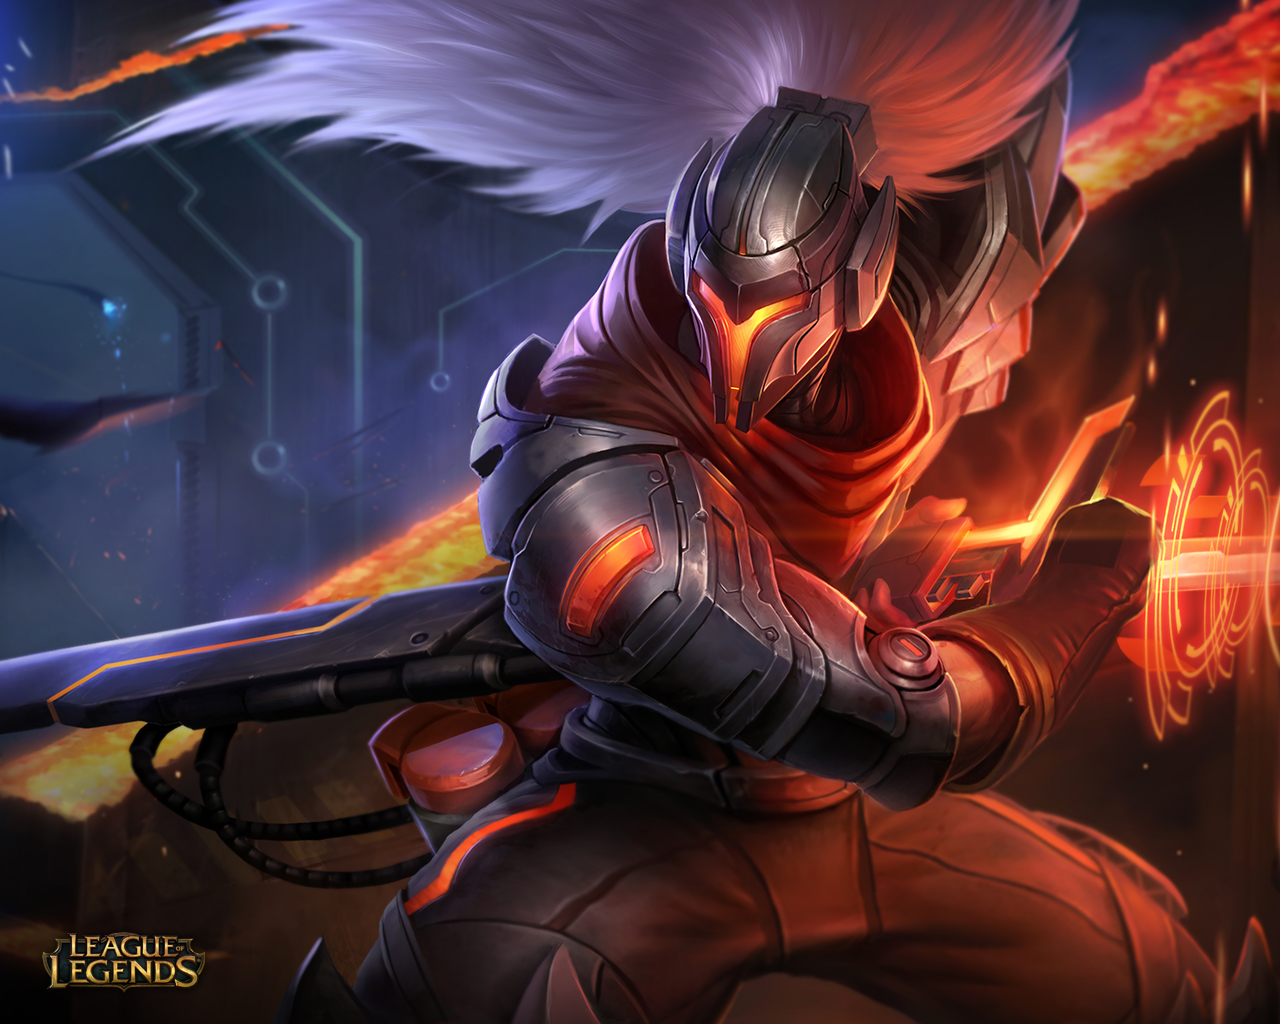 project yasuo wallpaper,action adventure game,cg artwork,illustration,games,pc game